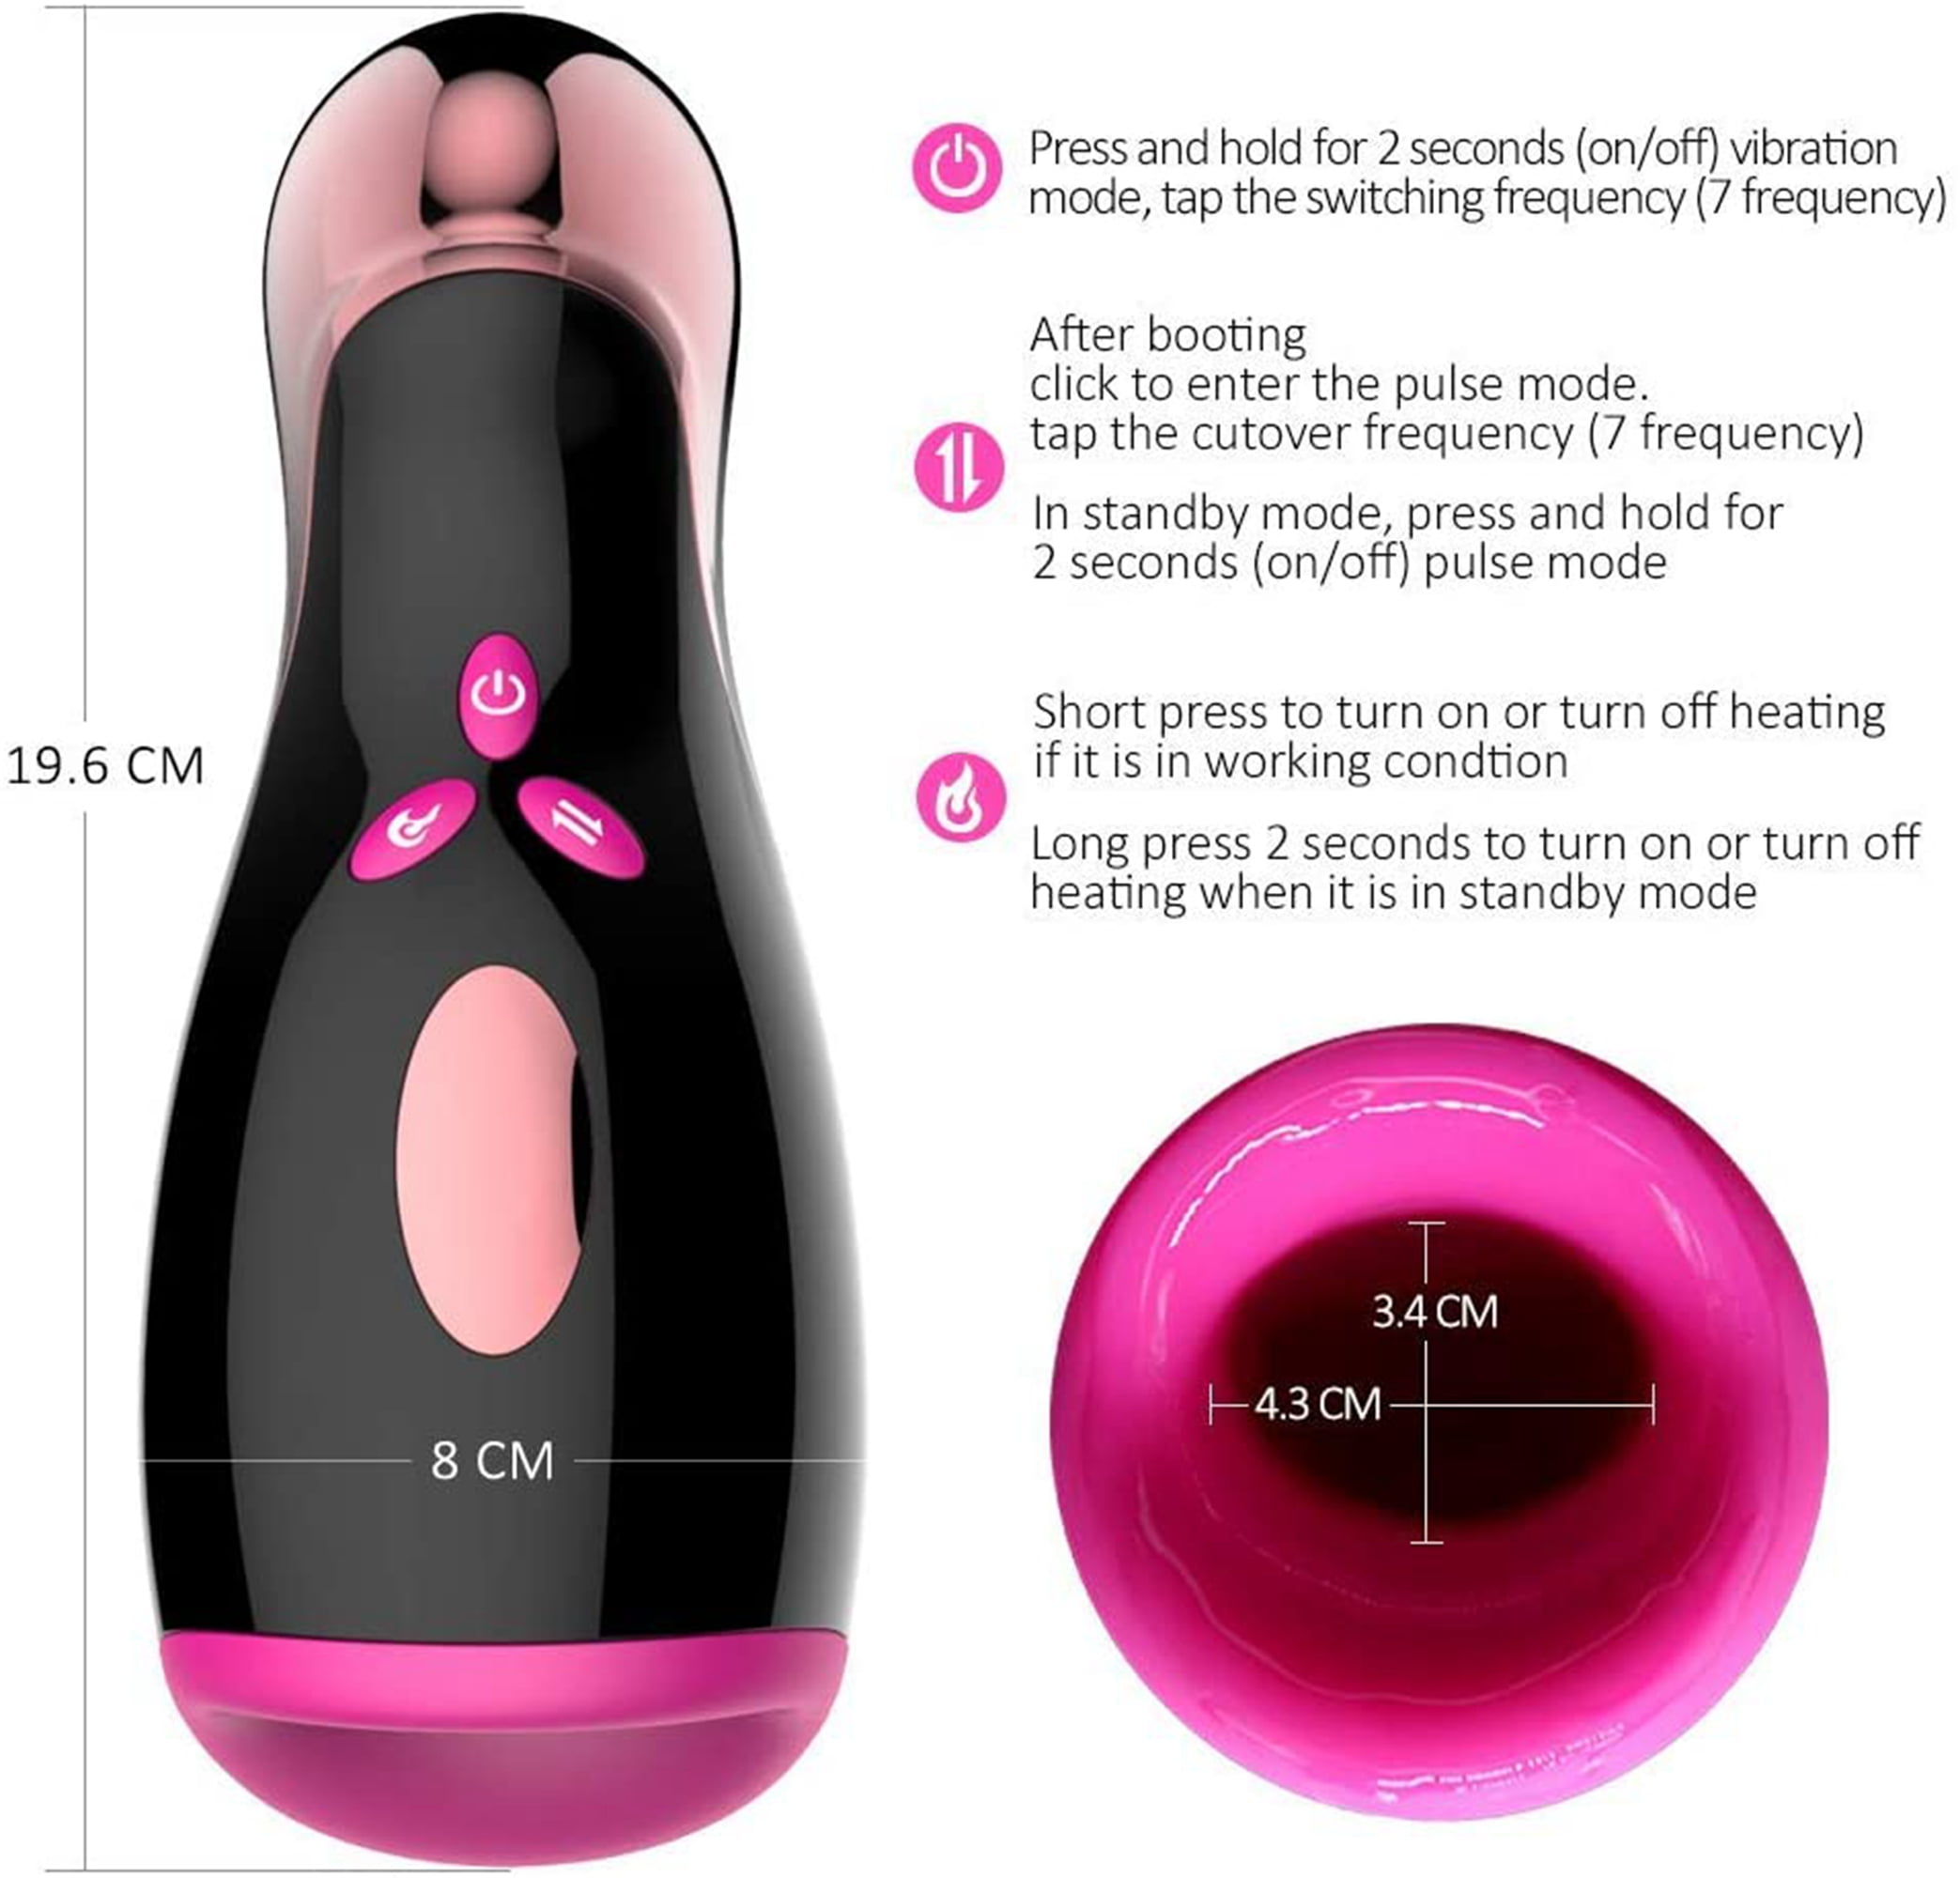 FESXTY Automatic Male Masturbator Cup with 7 Thrusting Vibration Stimulation, Electric Sex Toy, Adult Sex Toys for pic